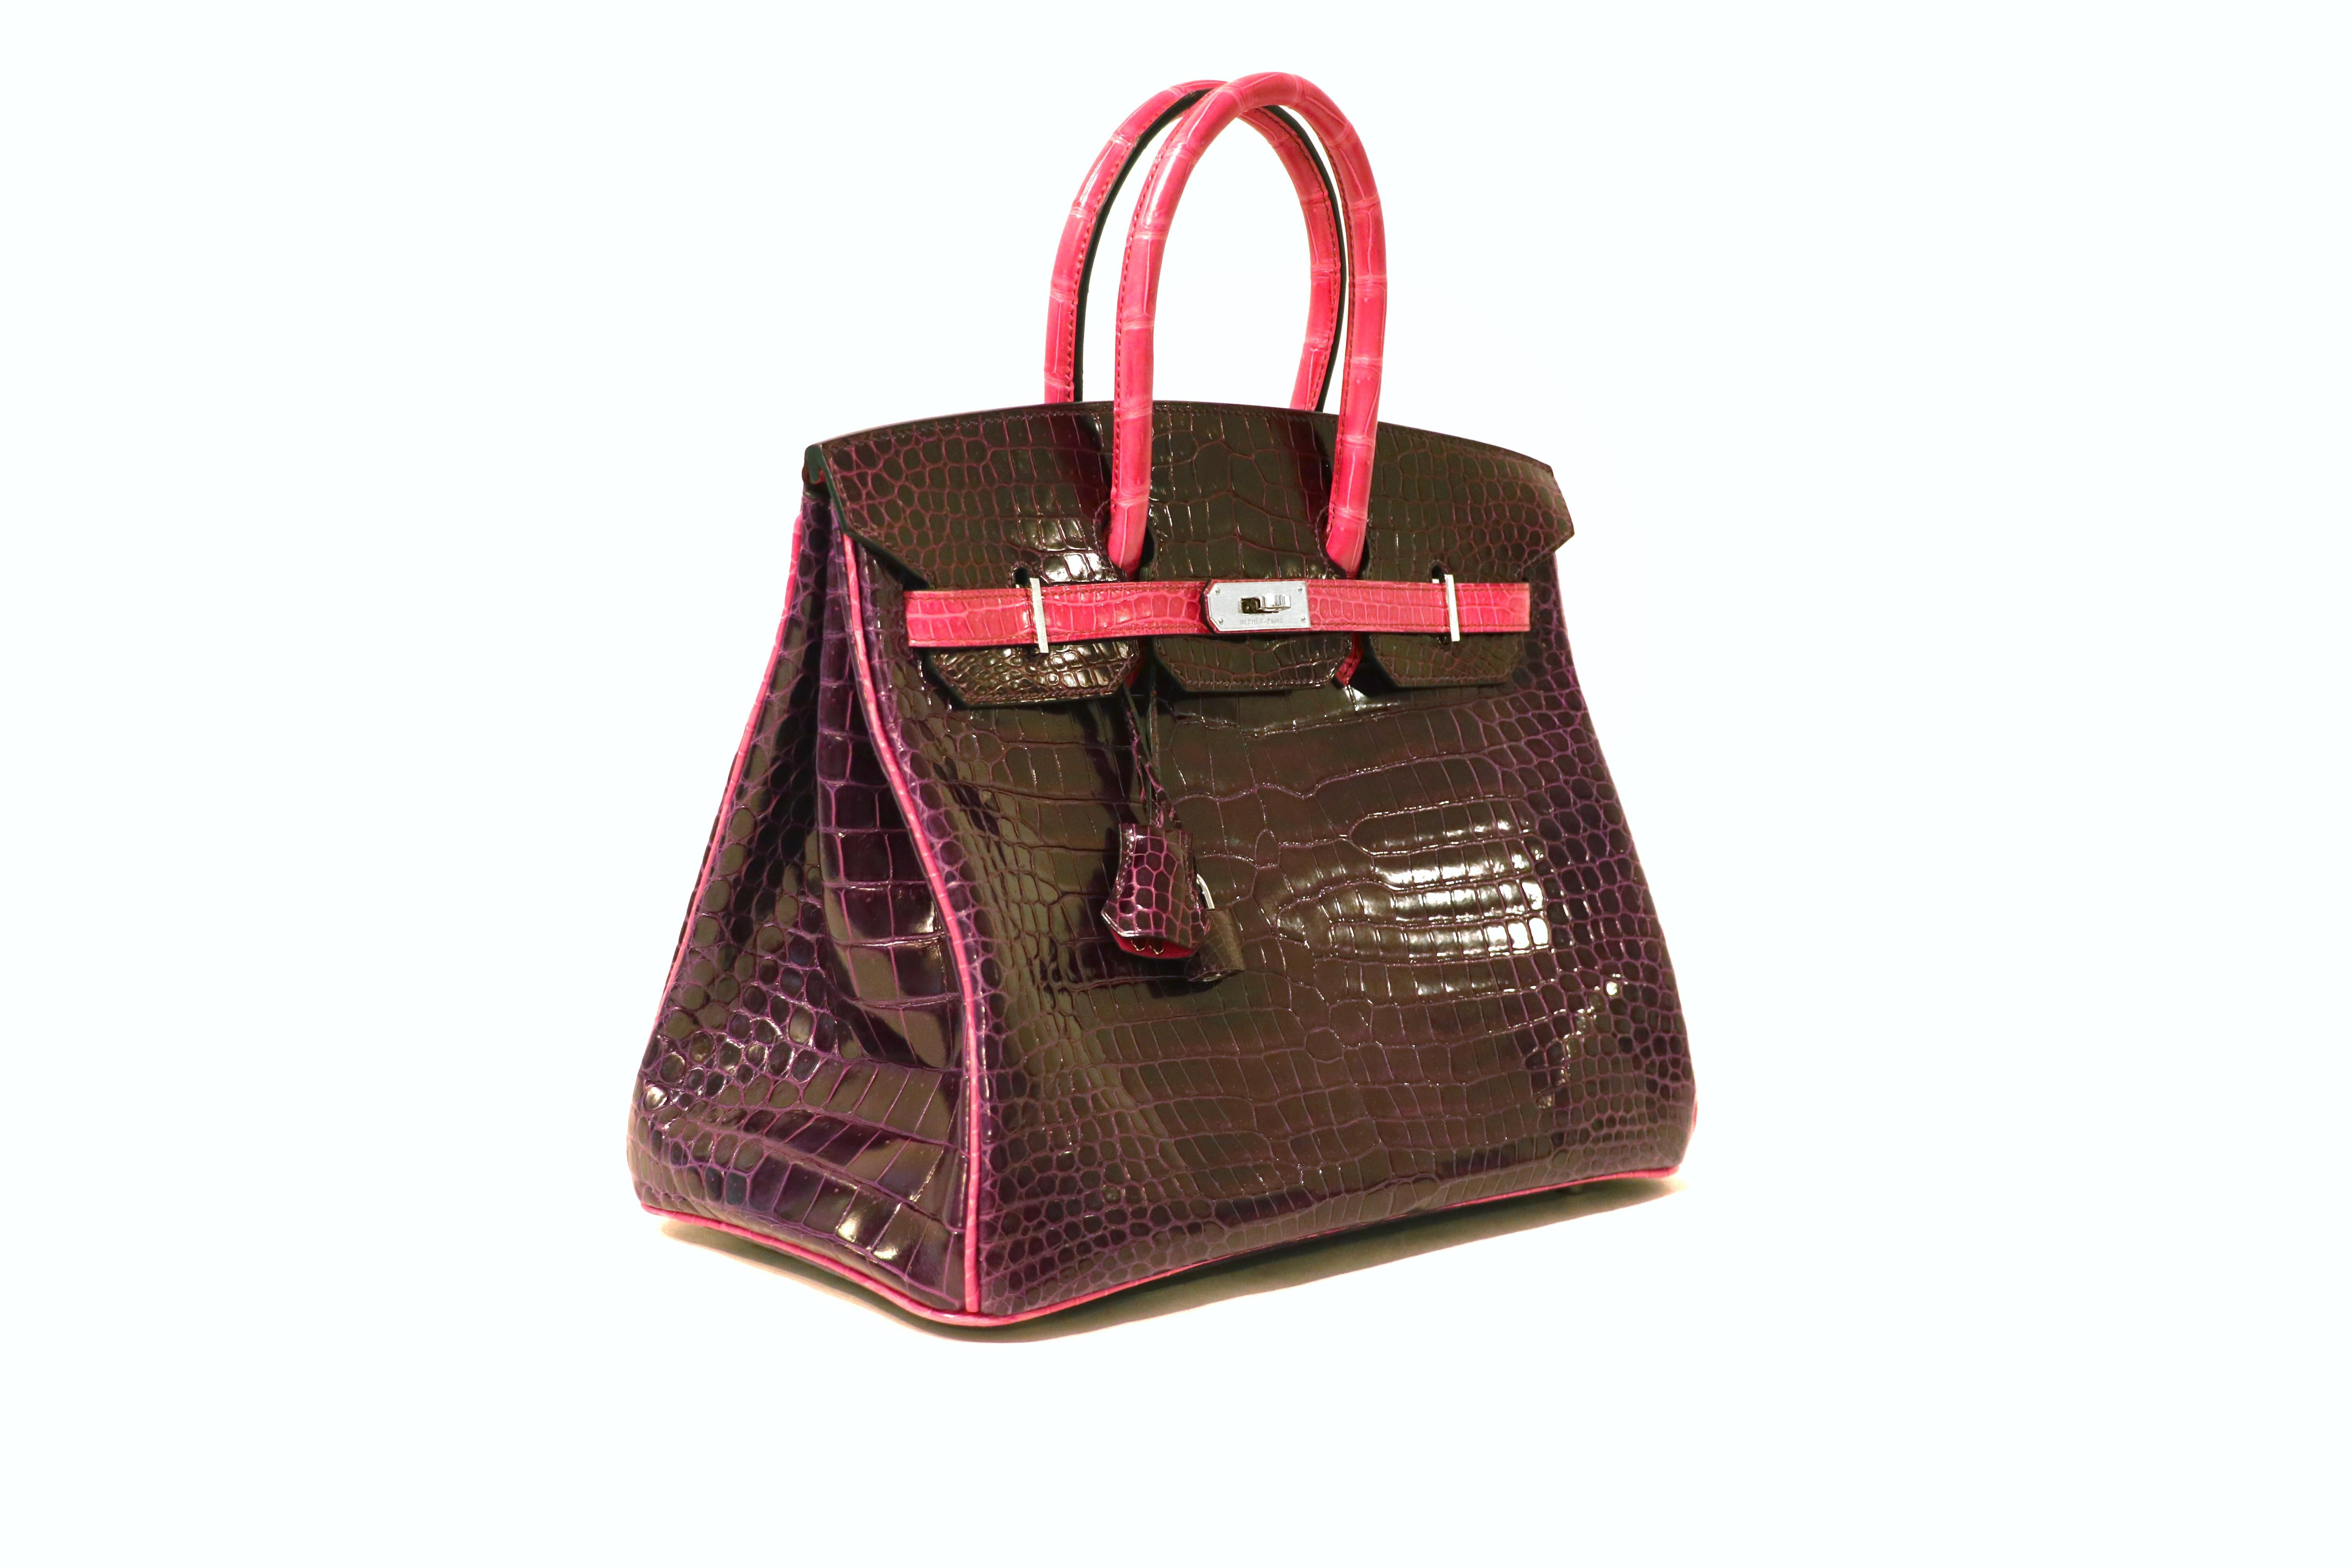 This authentic Hermès Amethyst and Fuchsia Porosus Crocodile 35 cm Birkin is in pristine condition with protective plastic on the hardware.  Hermès bags are considered the ultimate luxury item the world over.  Hand stitched by skilled craftsmen,